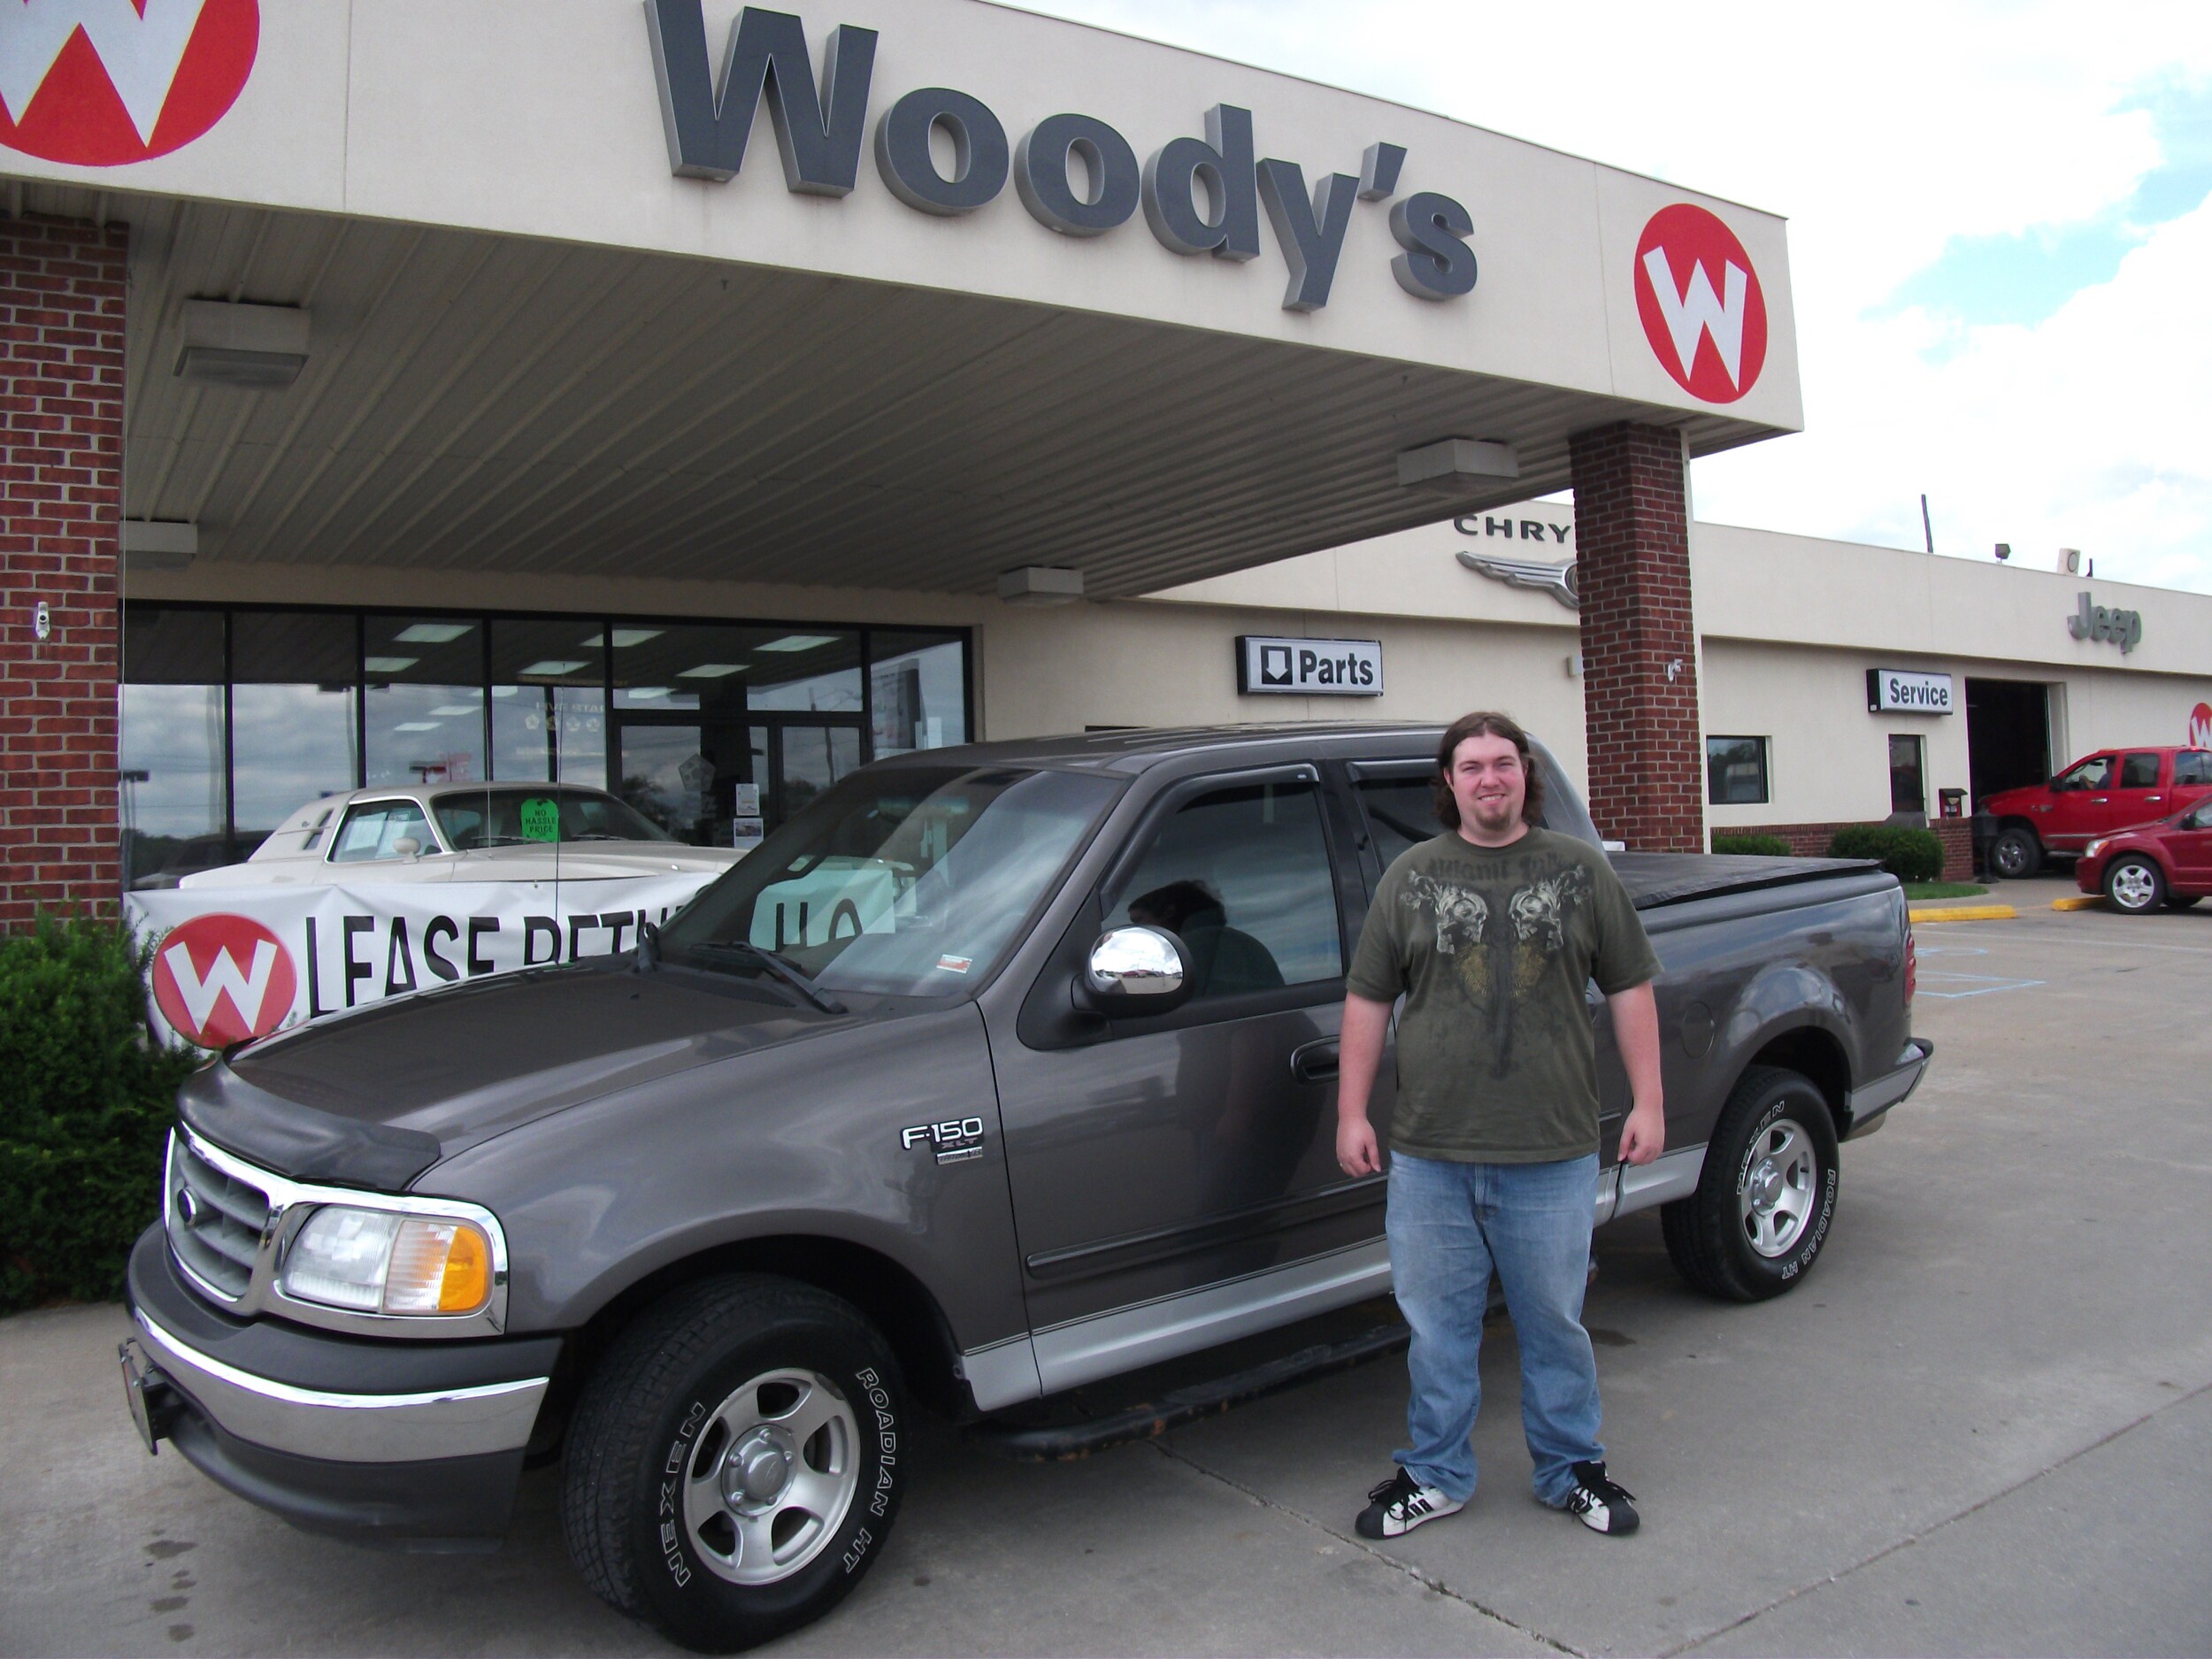 Woody dodge jeep chrysler chillicothe